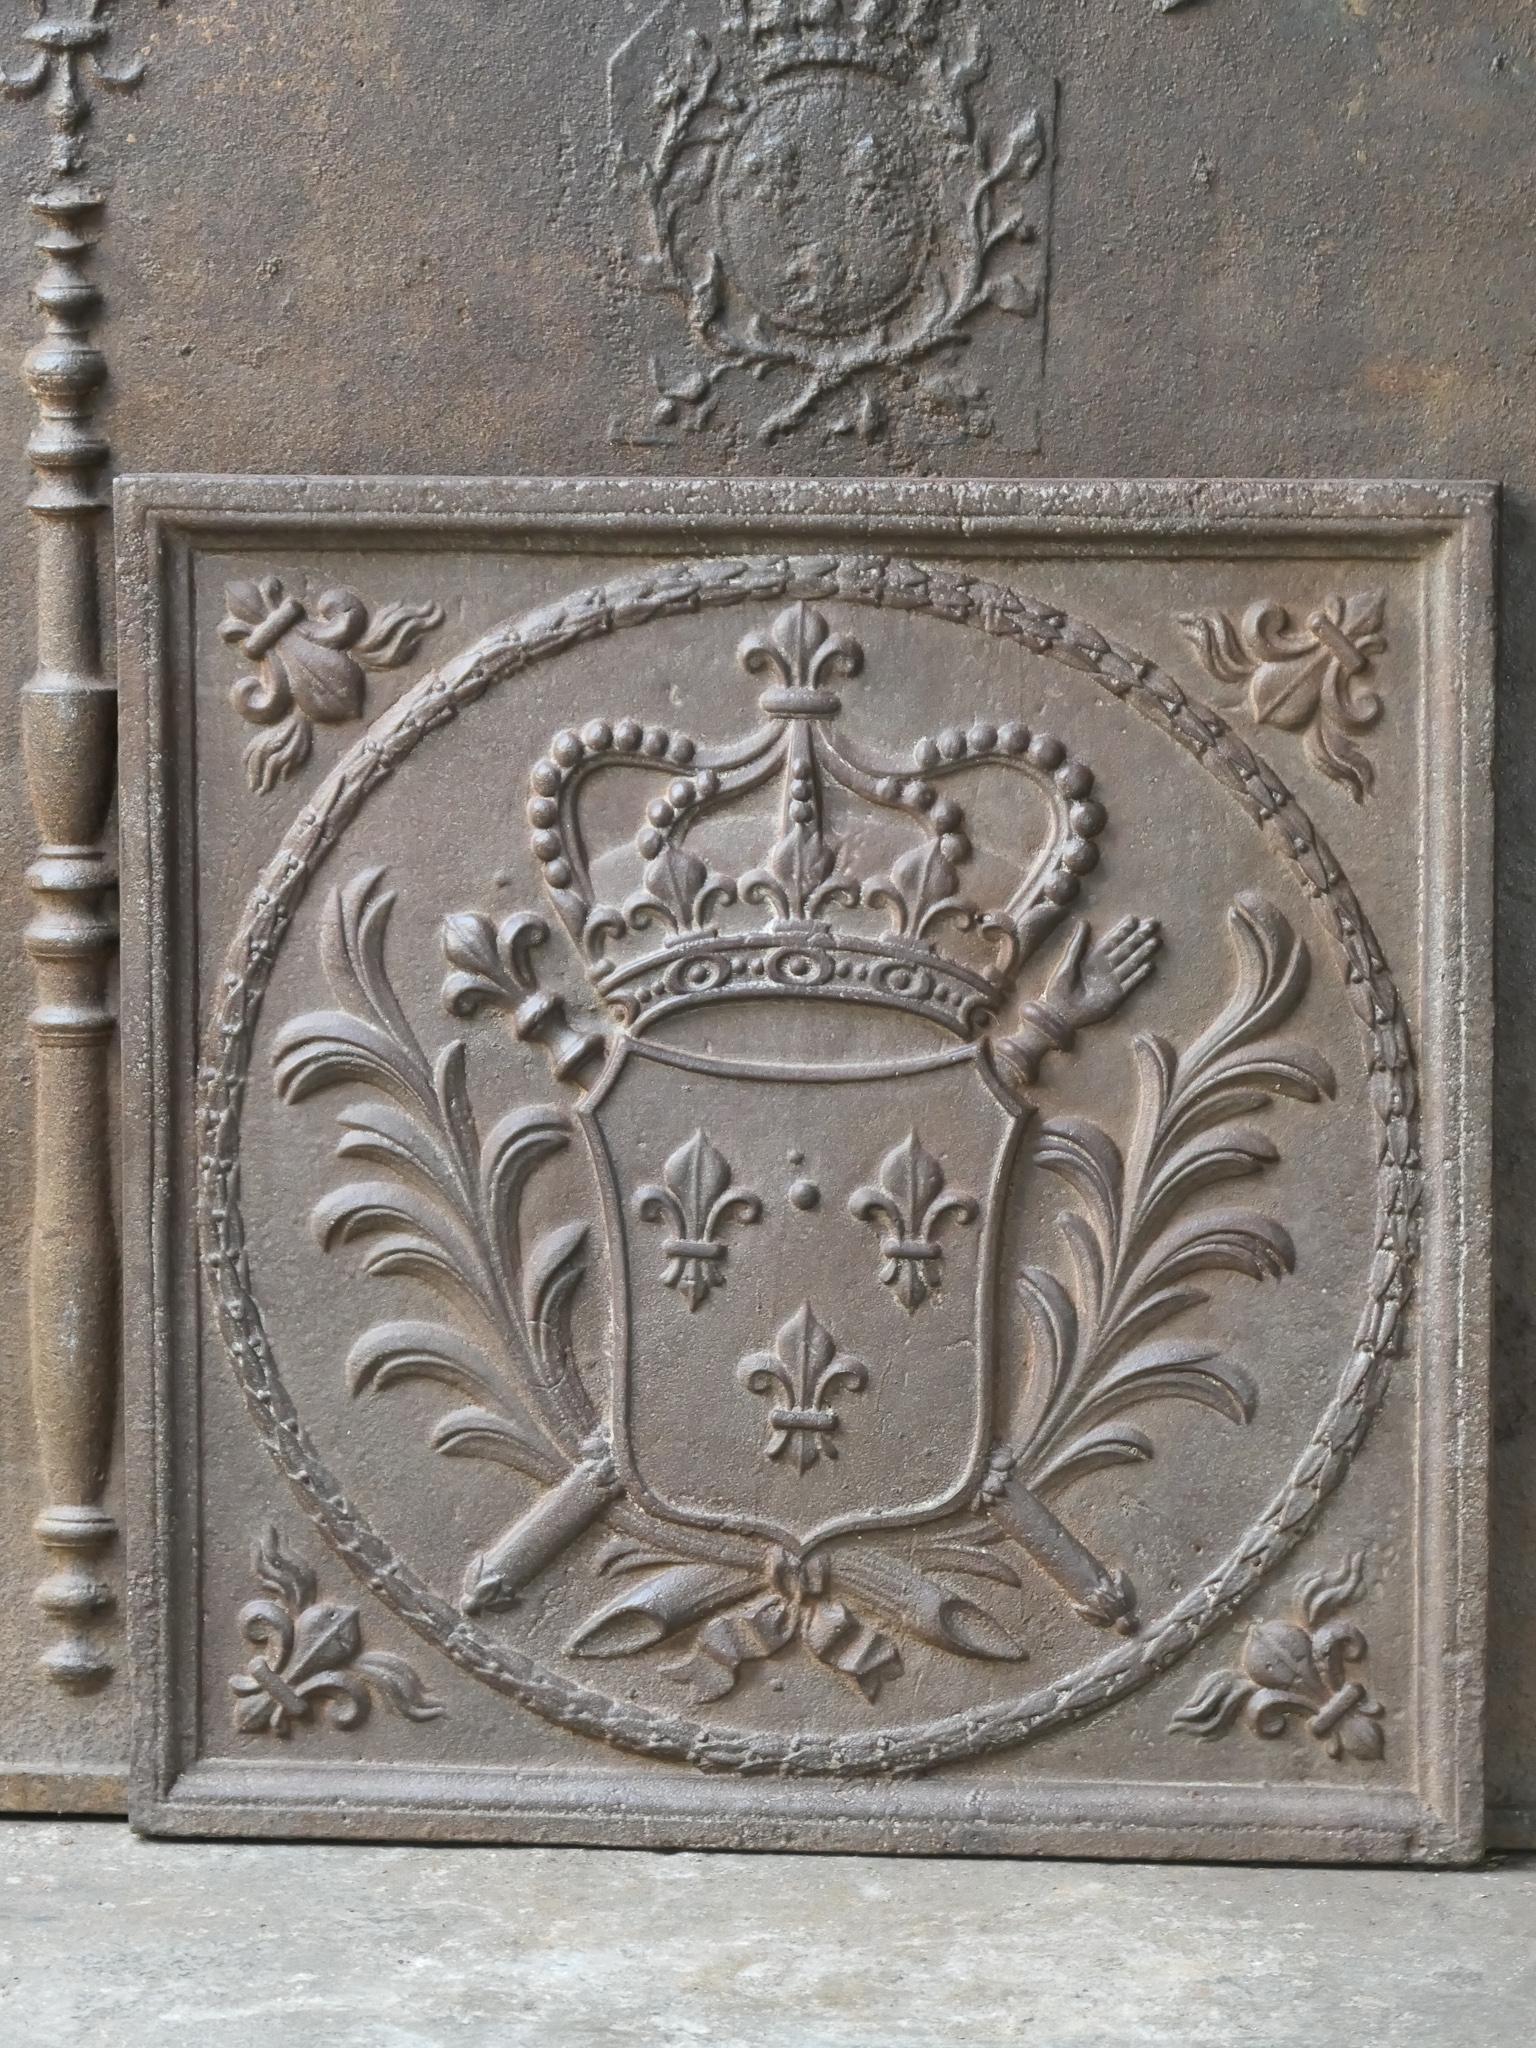 Late 19th or early 20th century French Louis XV style fireback with the arms of France. Coat of arms of the House of Bourbon, an originally French royal house that became a major dynasty in Europe. It delivered kings for Spain (Navarra), France,